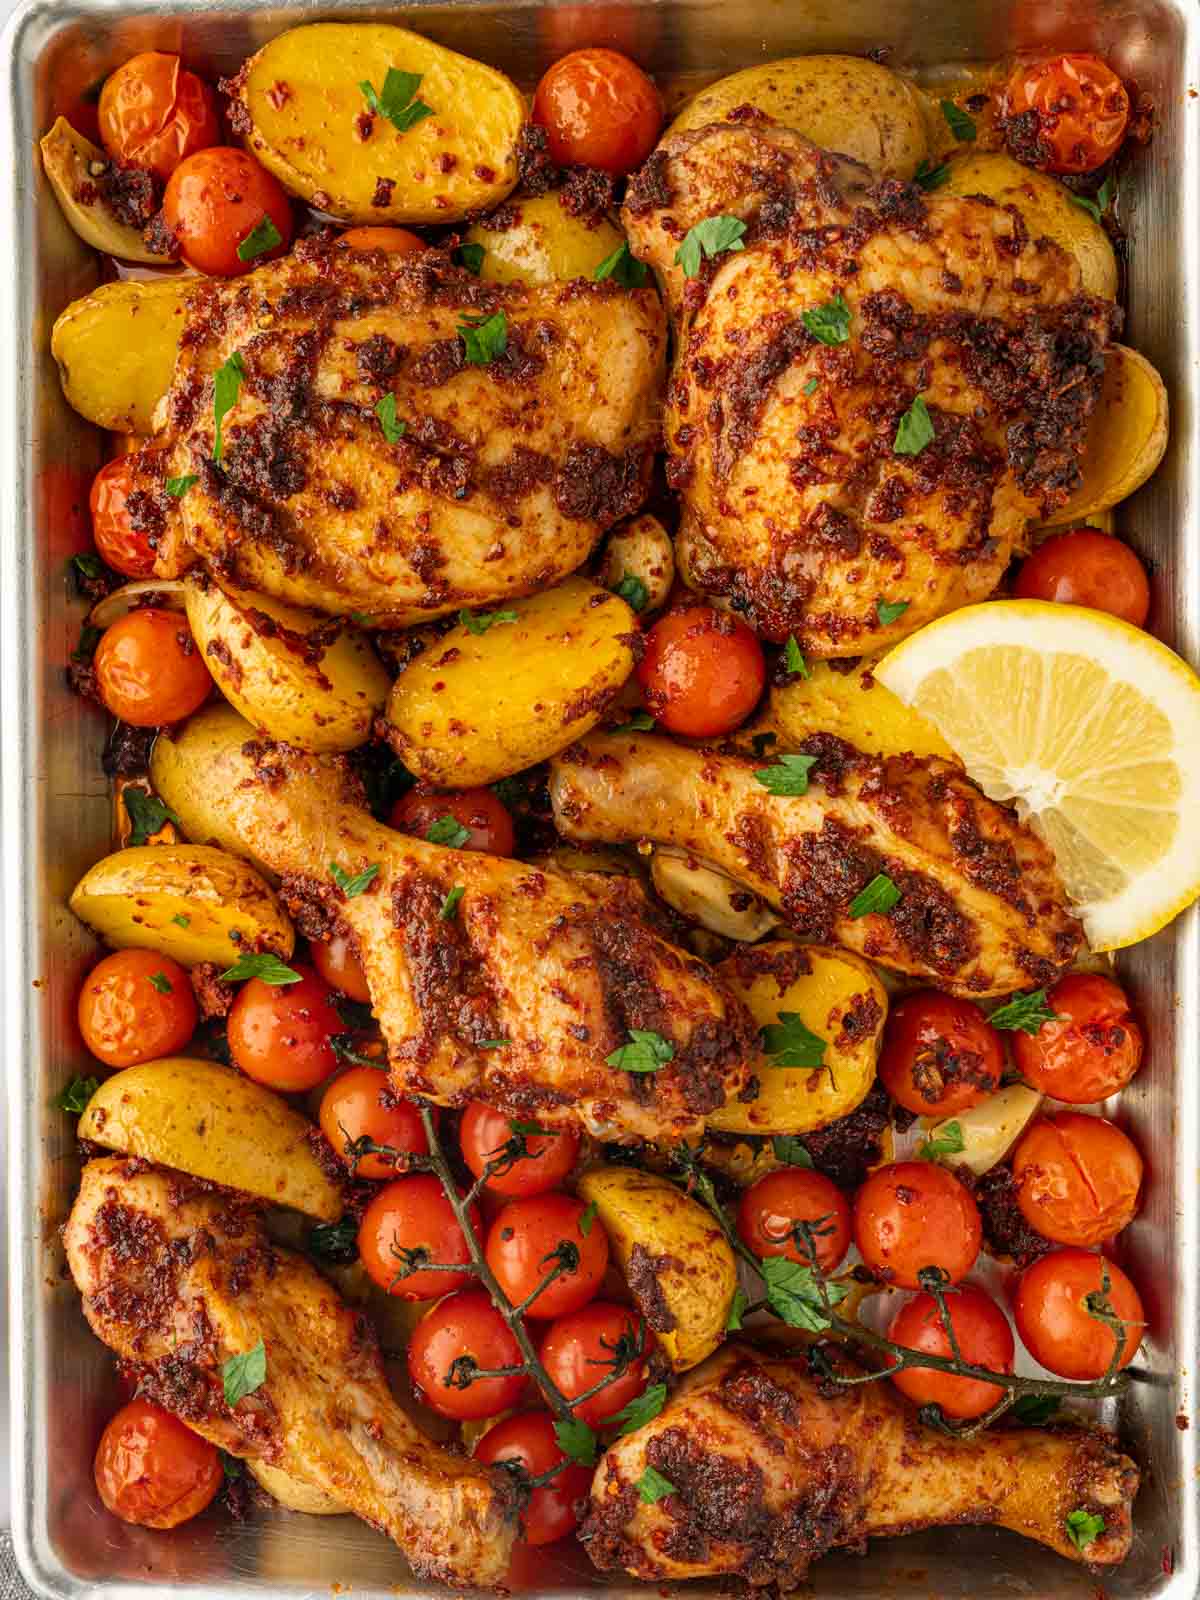 Chicken with harissa baked on a tray.